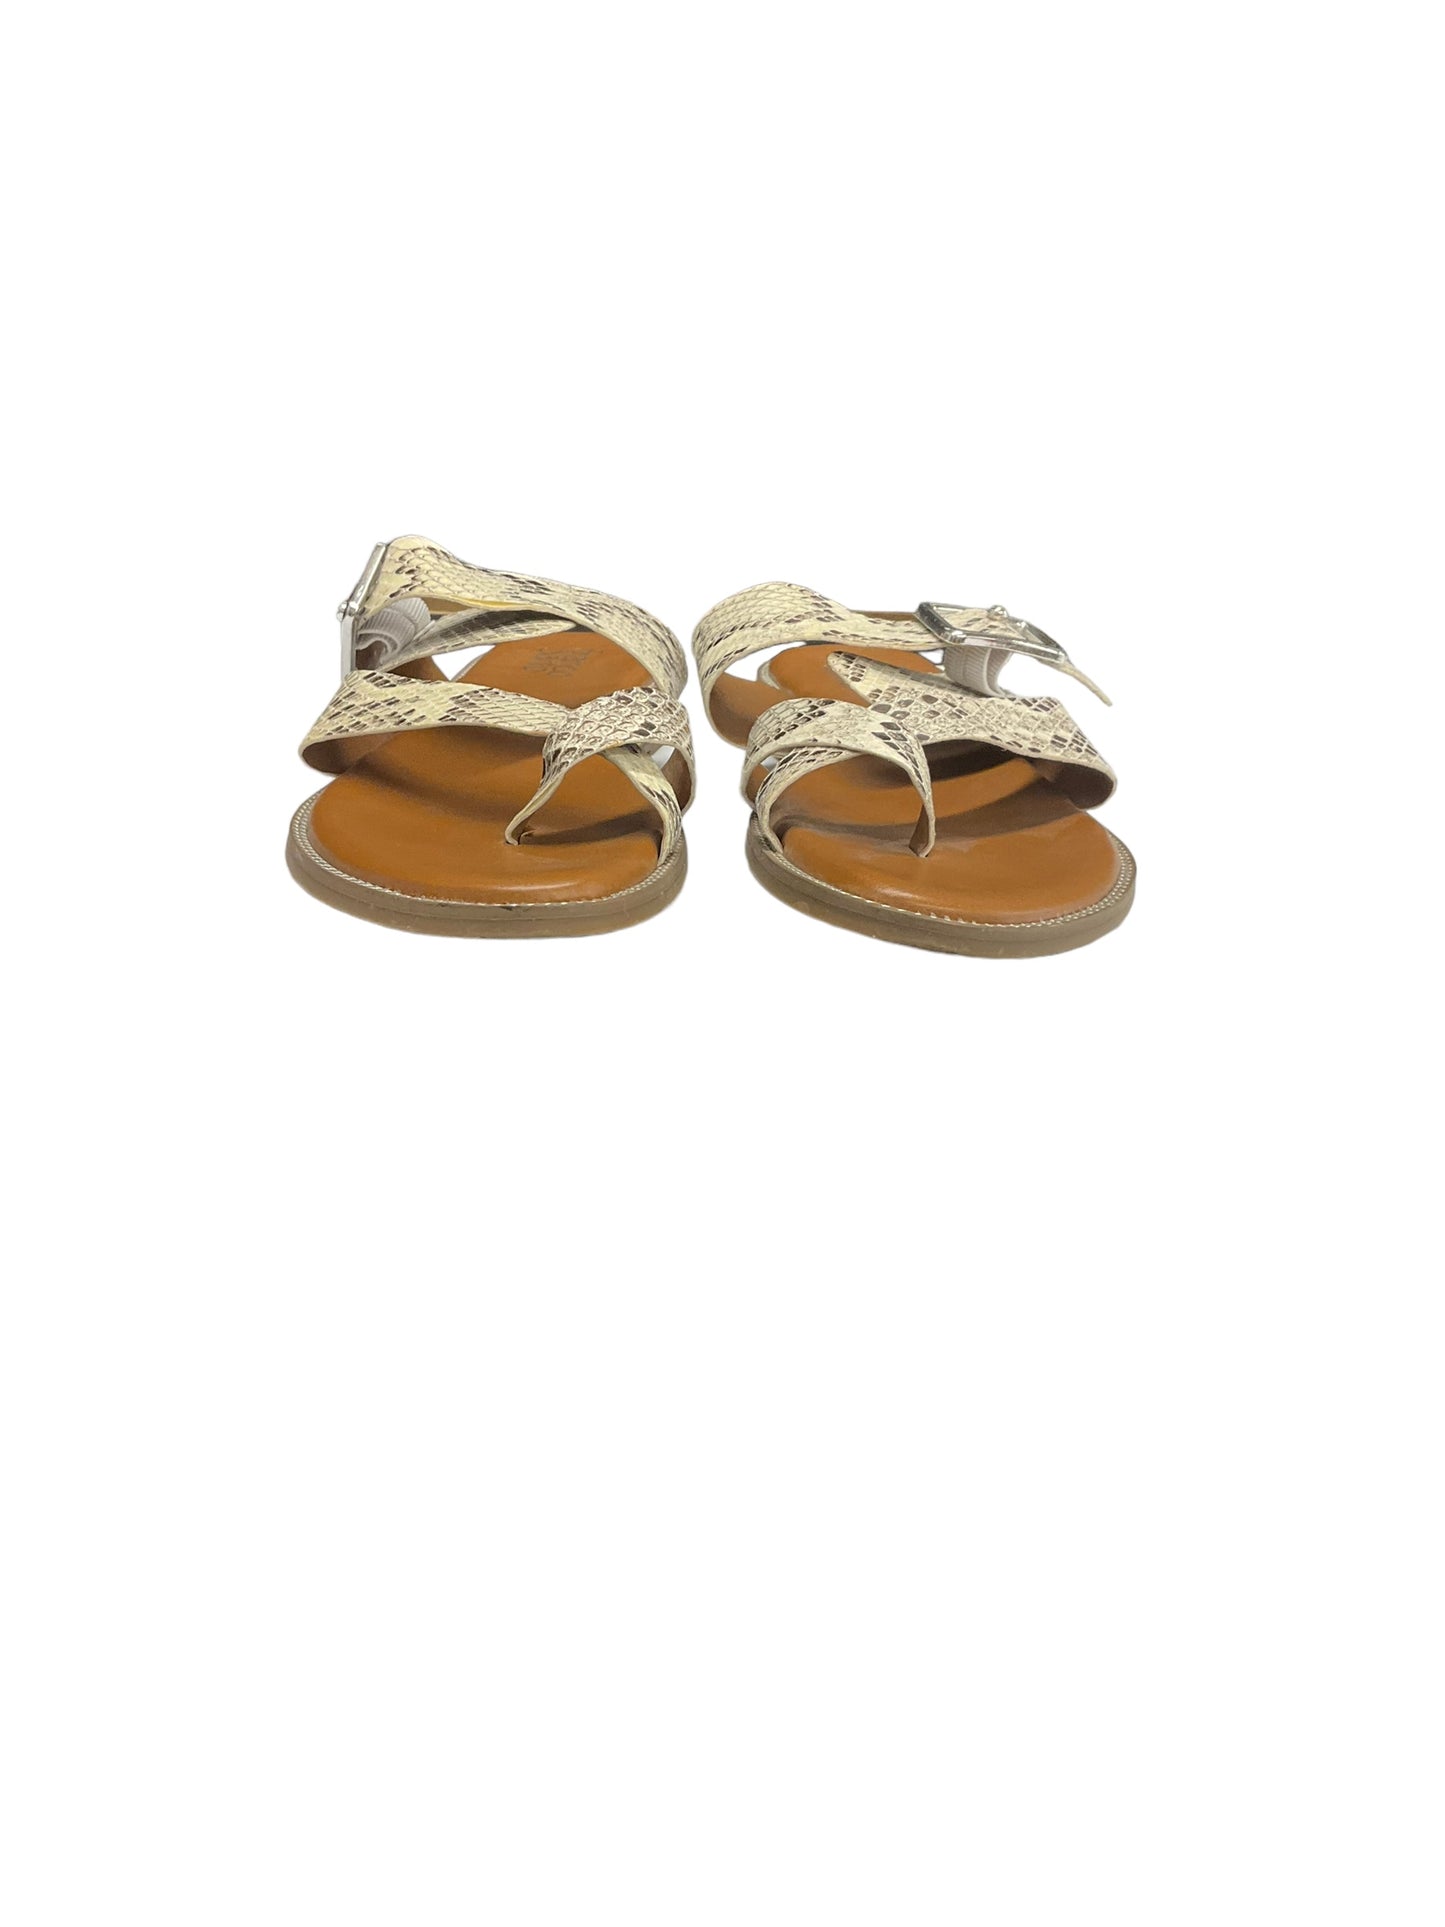 Sandals Flats By Franco Sarto  Size: 10